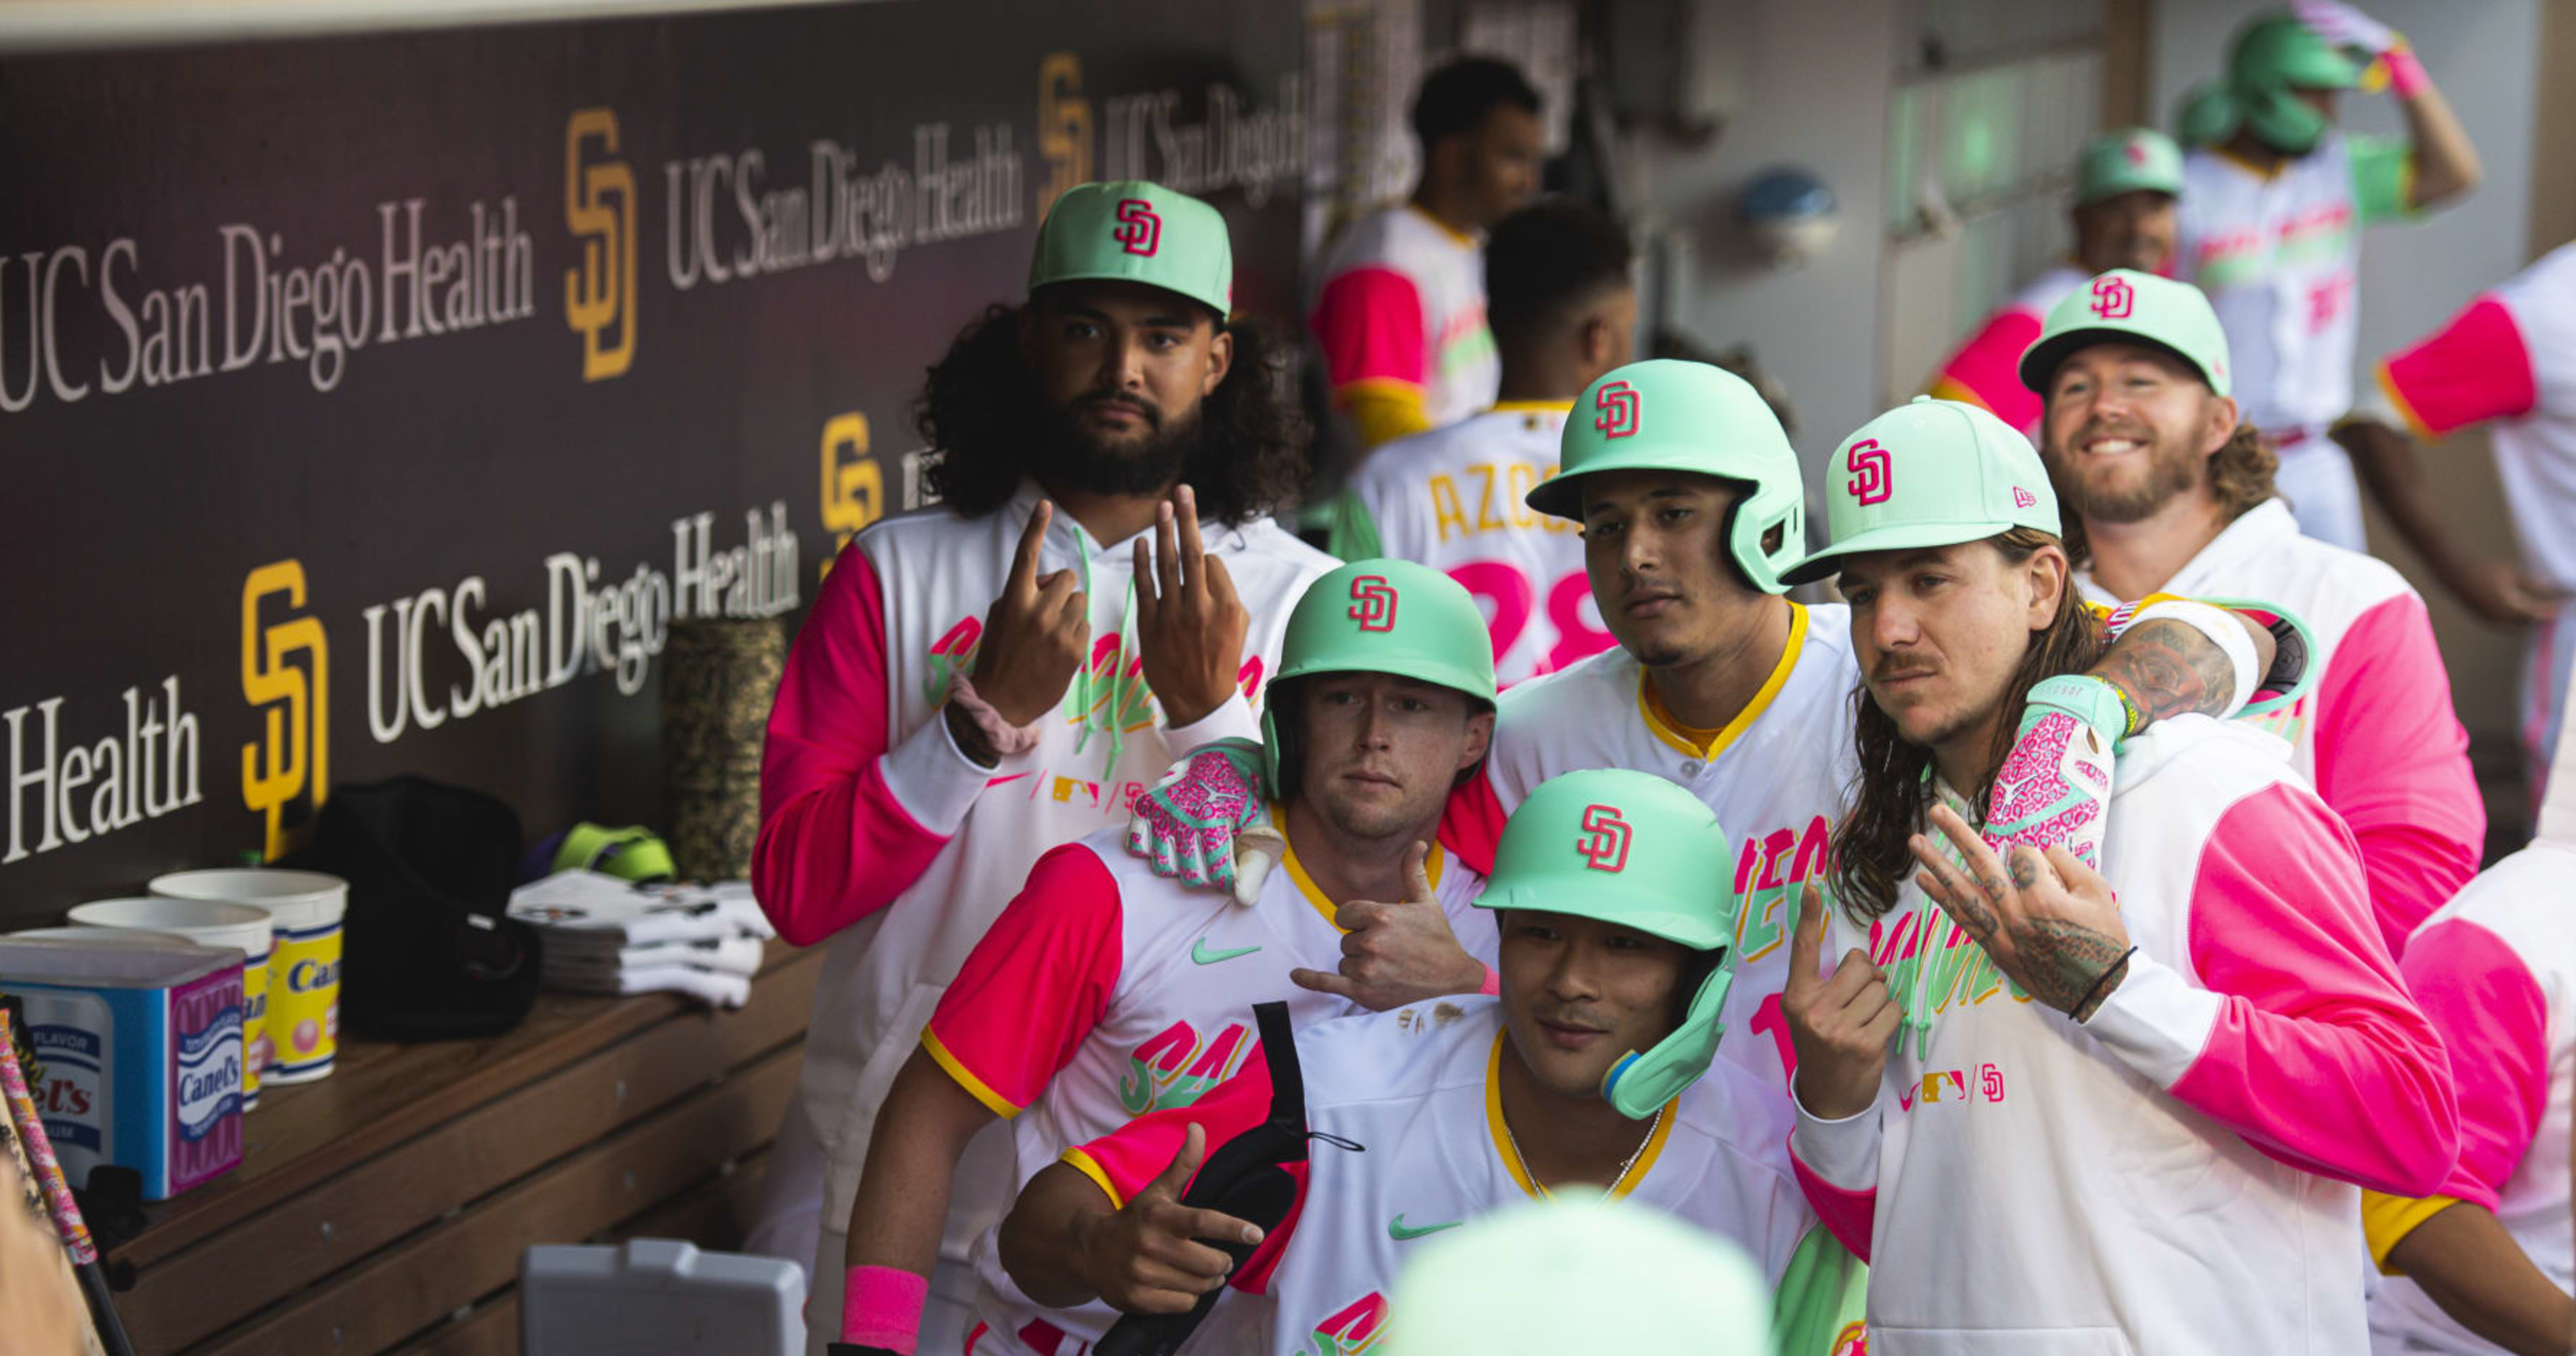 Padres' City Connect jerseys unveiled: Pink, green and gold uniforms